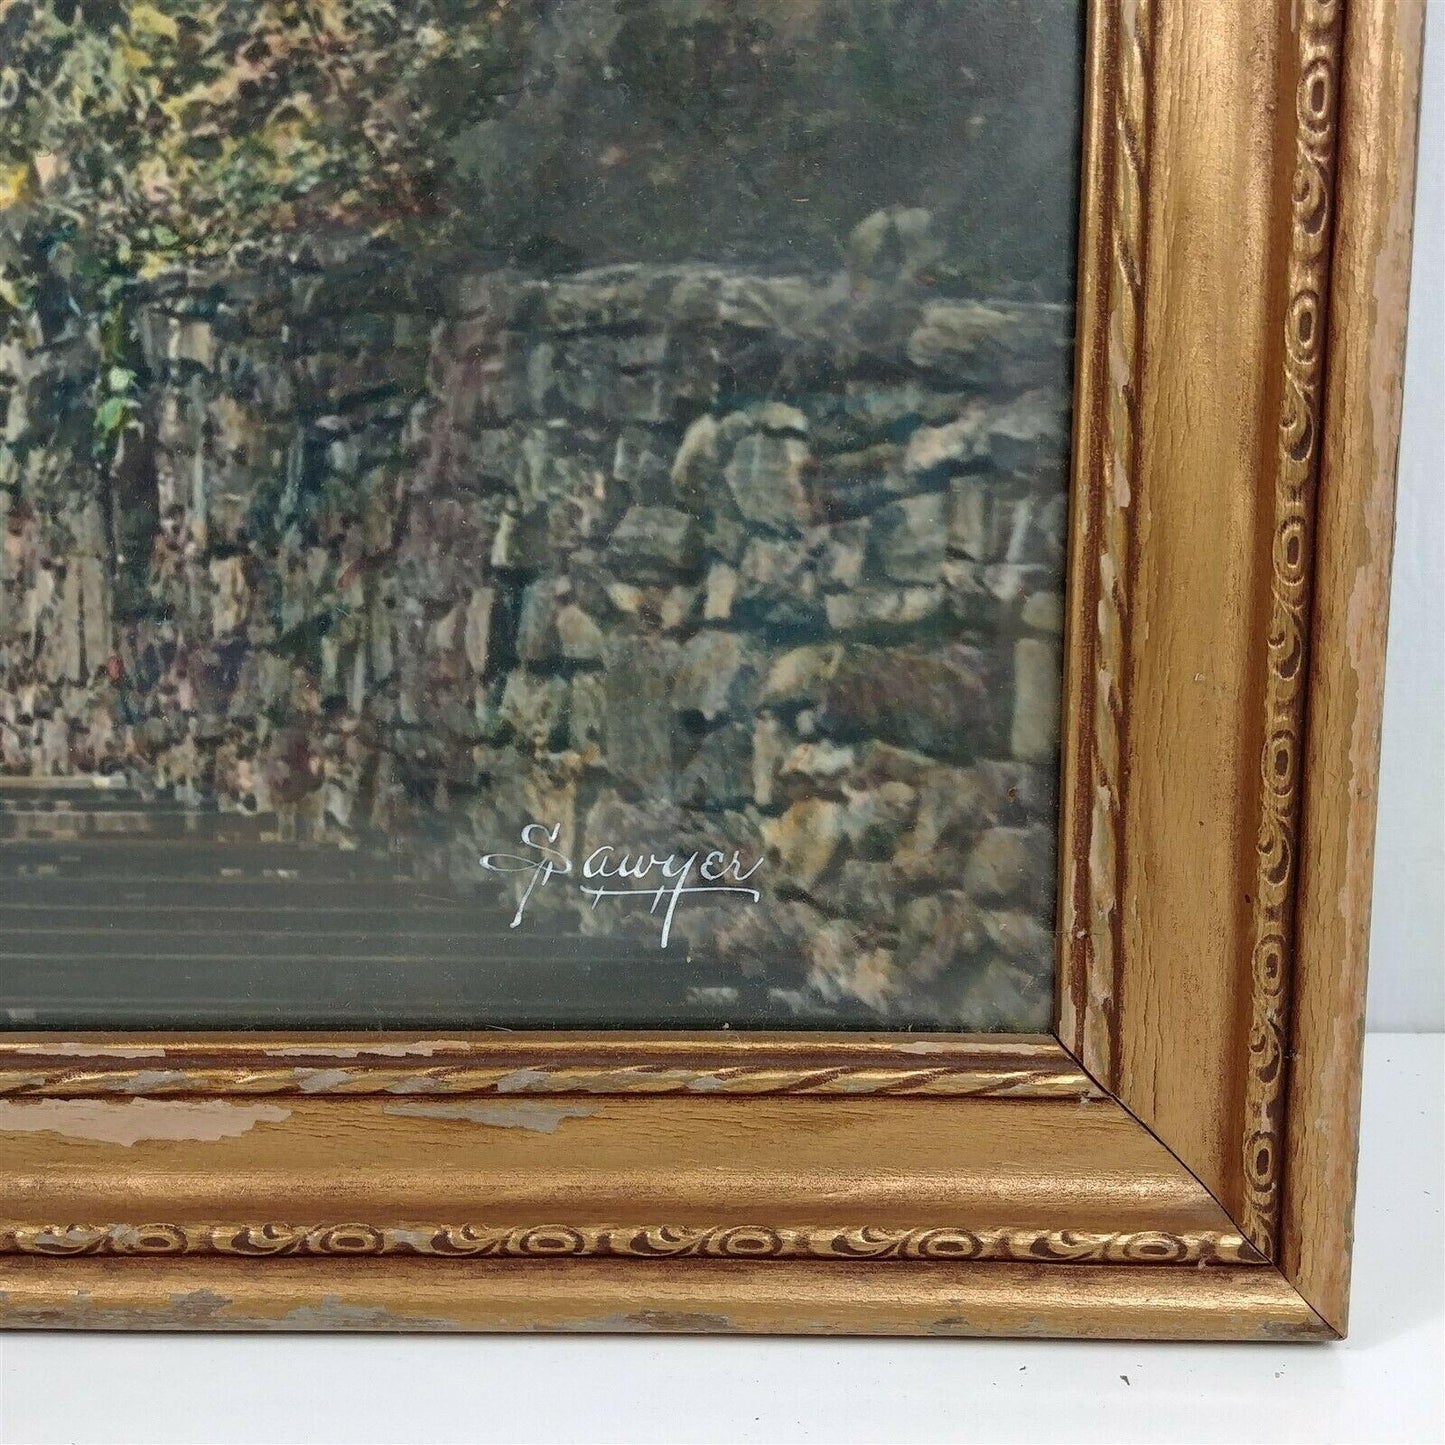 Virginia Natural Bridge Rock Arch Trees Framed Photograph Hand Colored Photo